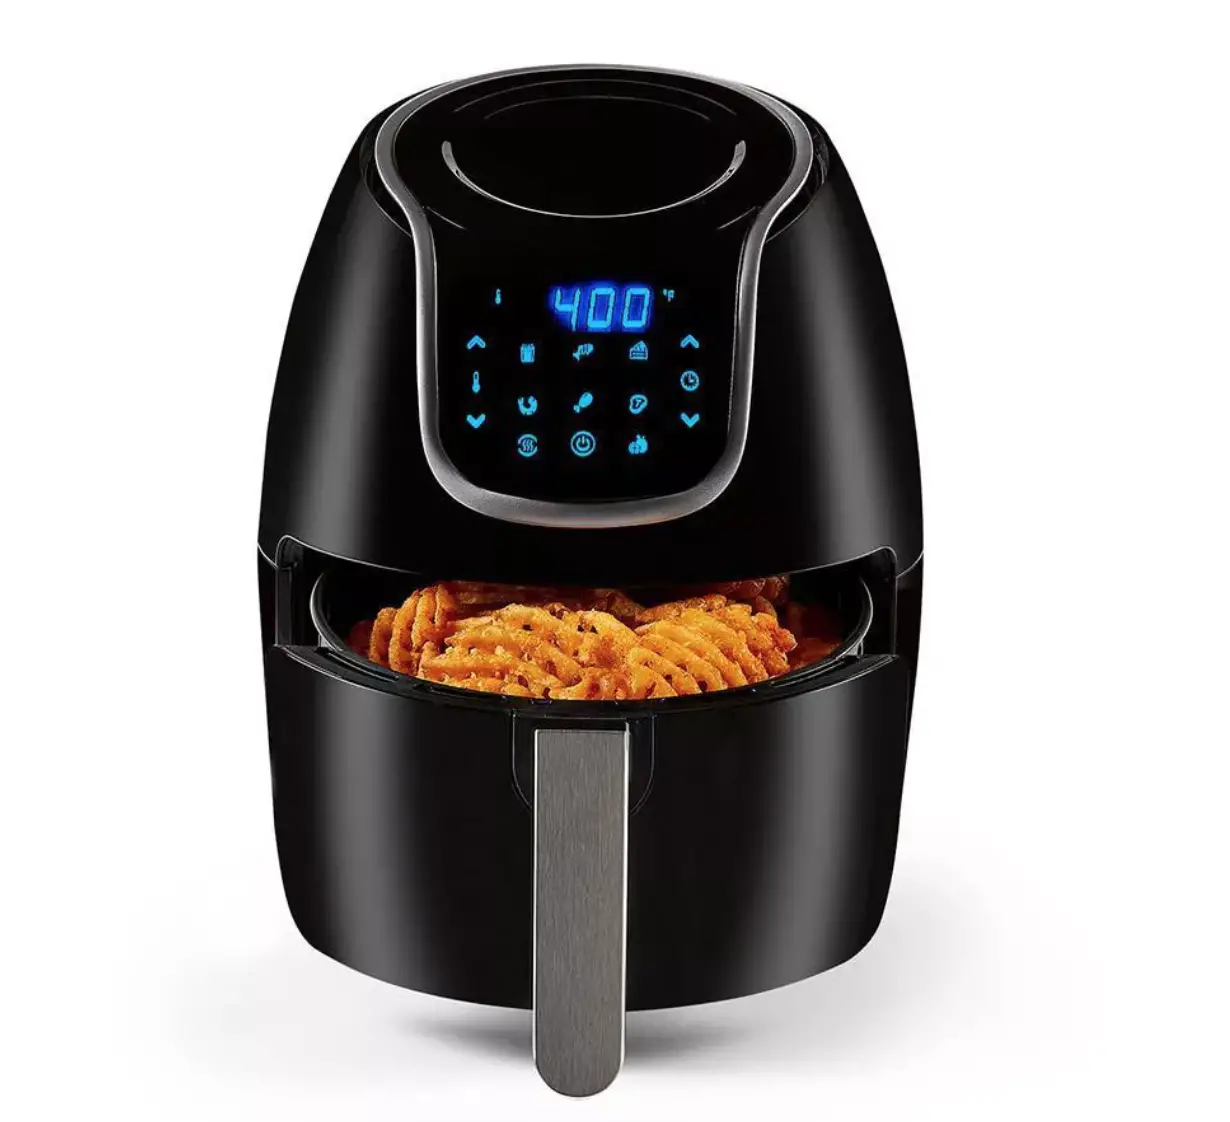 Make healthier meals with this air fryer thats over 40 percent off